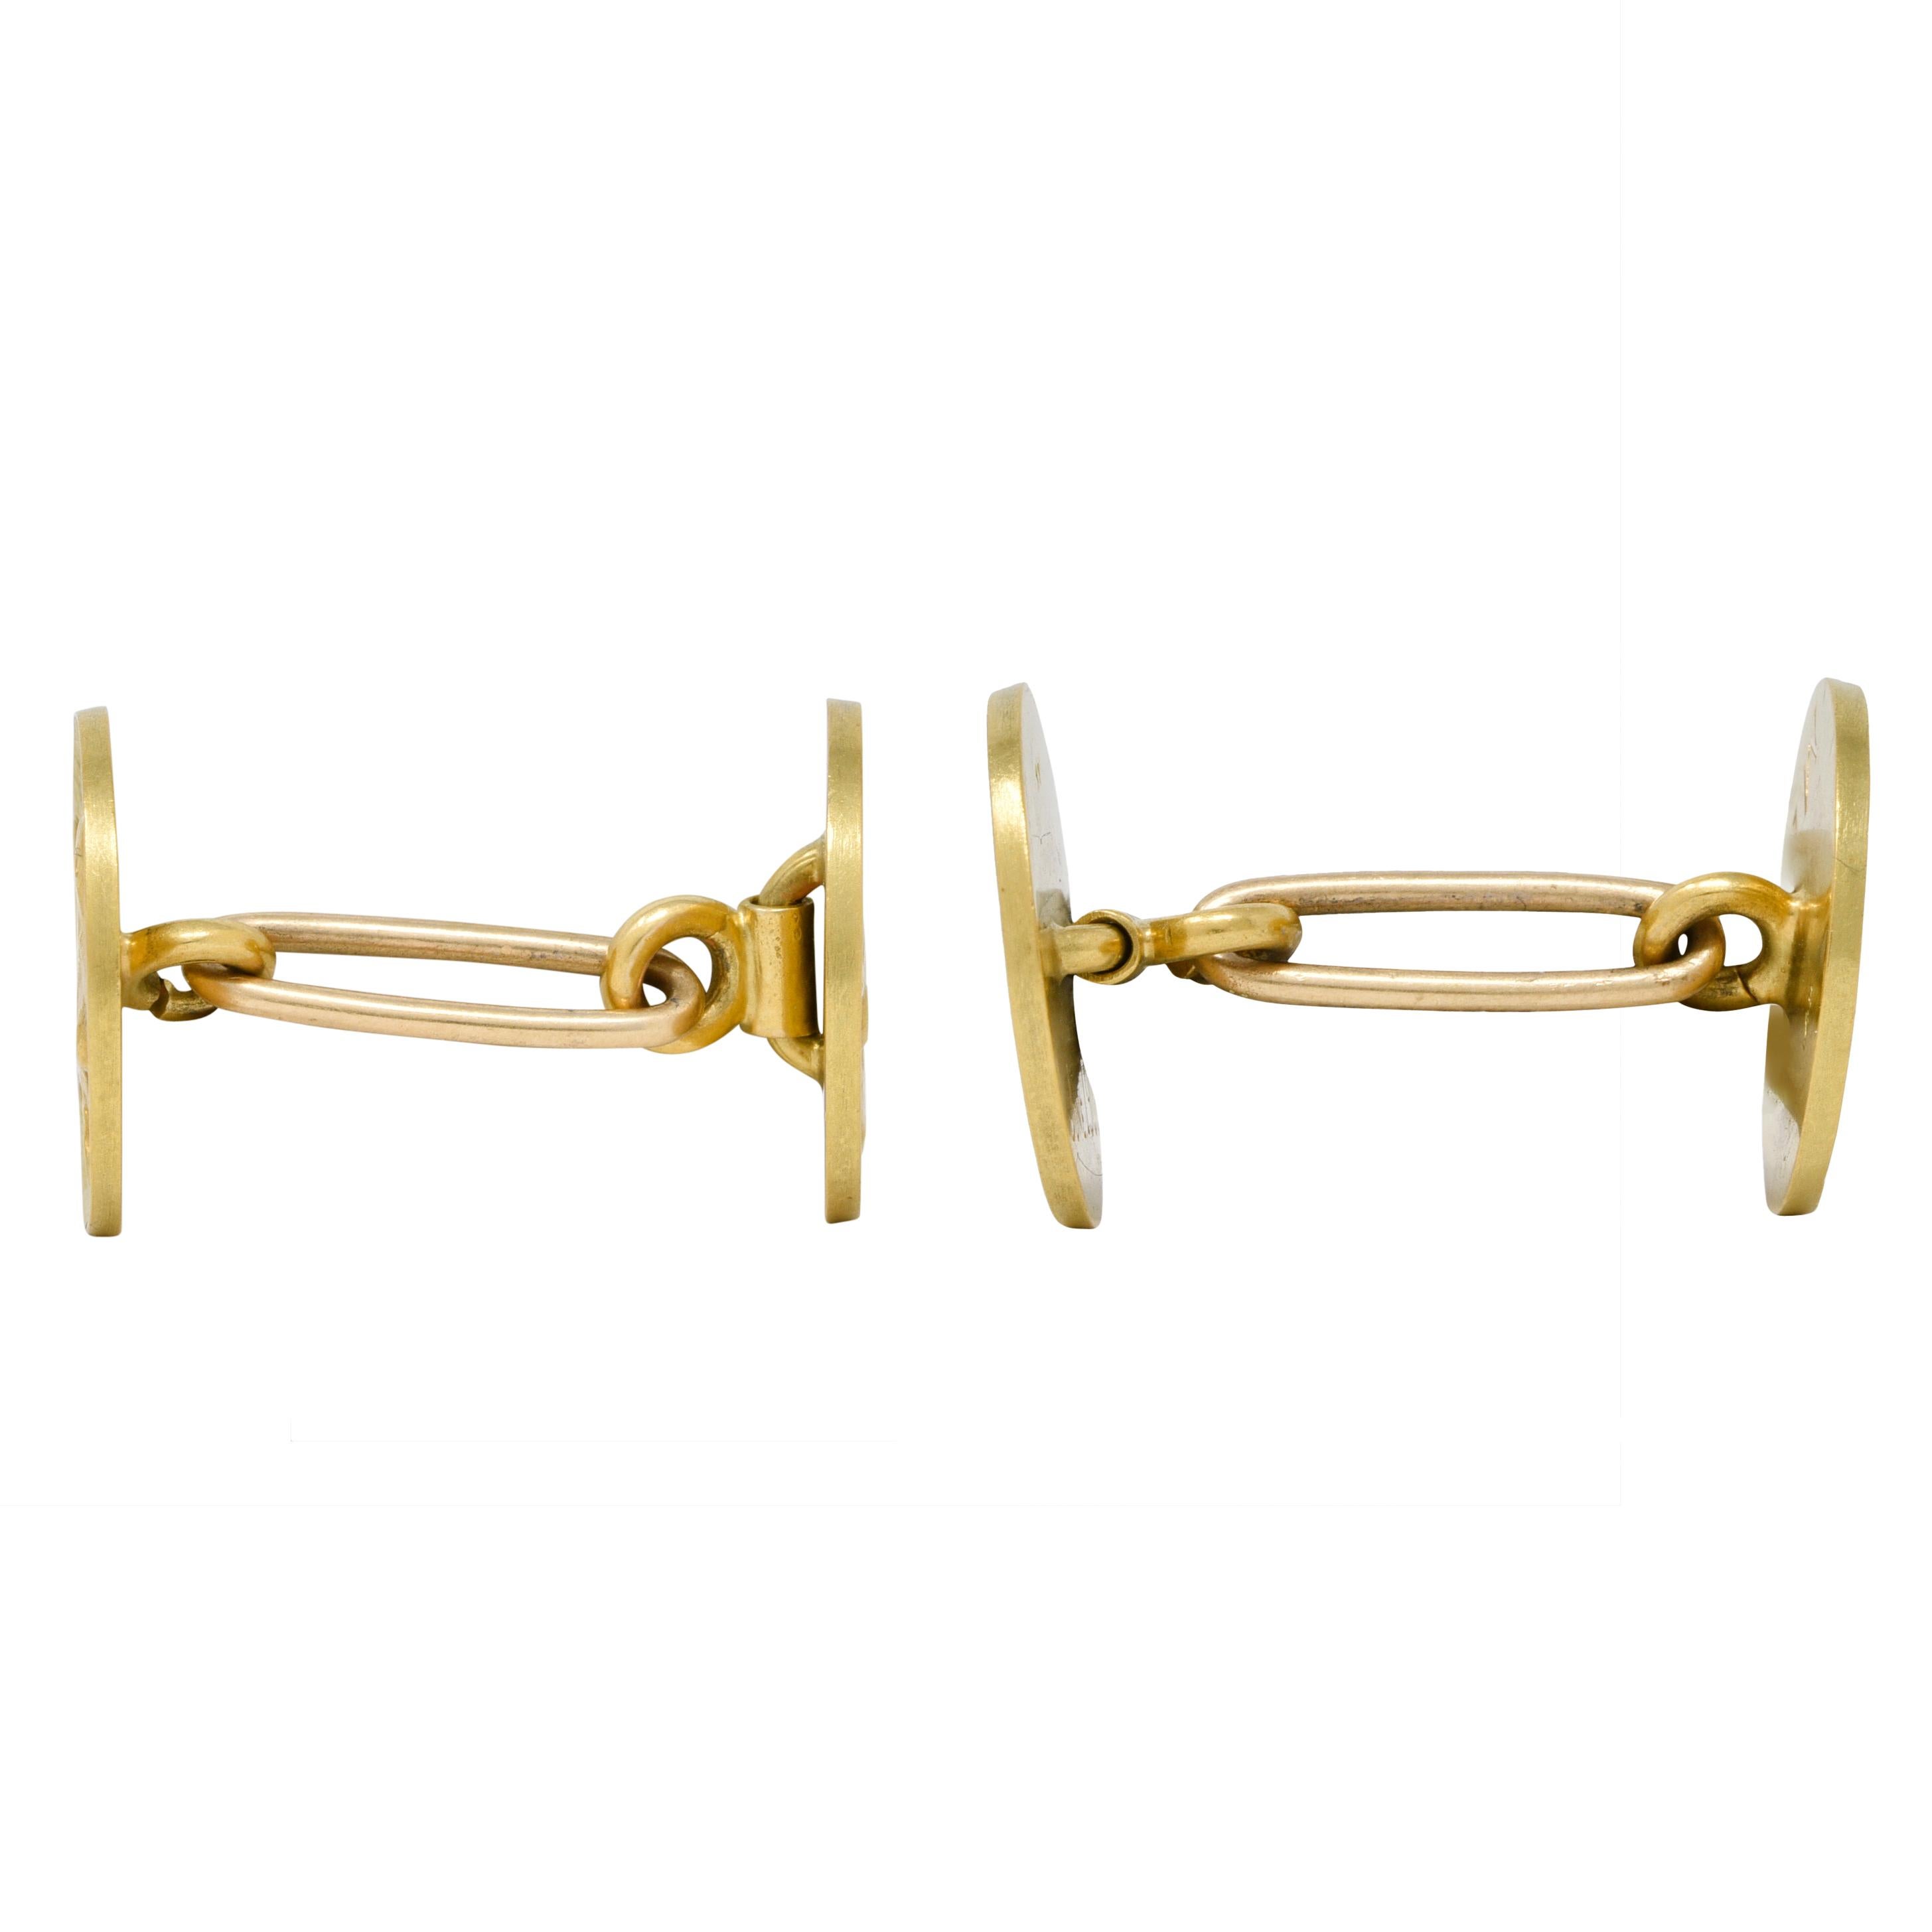 Designed as green gold link style cufflinks terminating with round faces centering raised cameos
Depicting portraits of highly rendered yellow gold horses 
With a textured background of trees and grass
Connected via an oval link
Inscribed 'June 1908